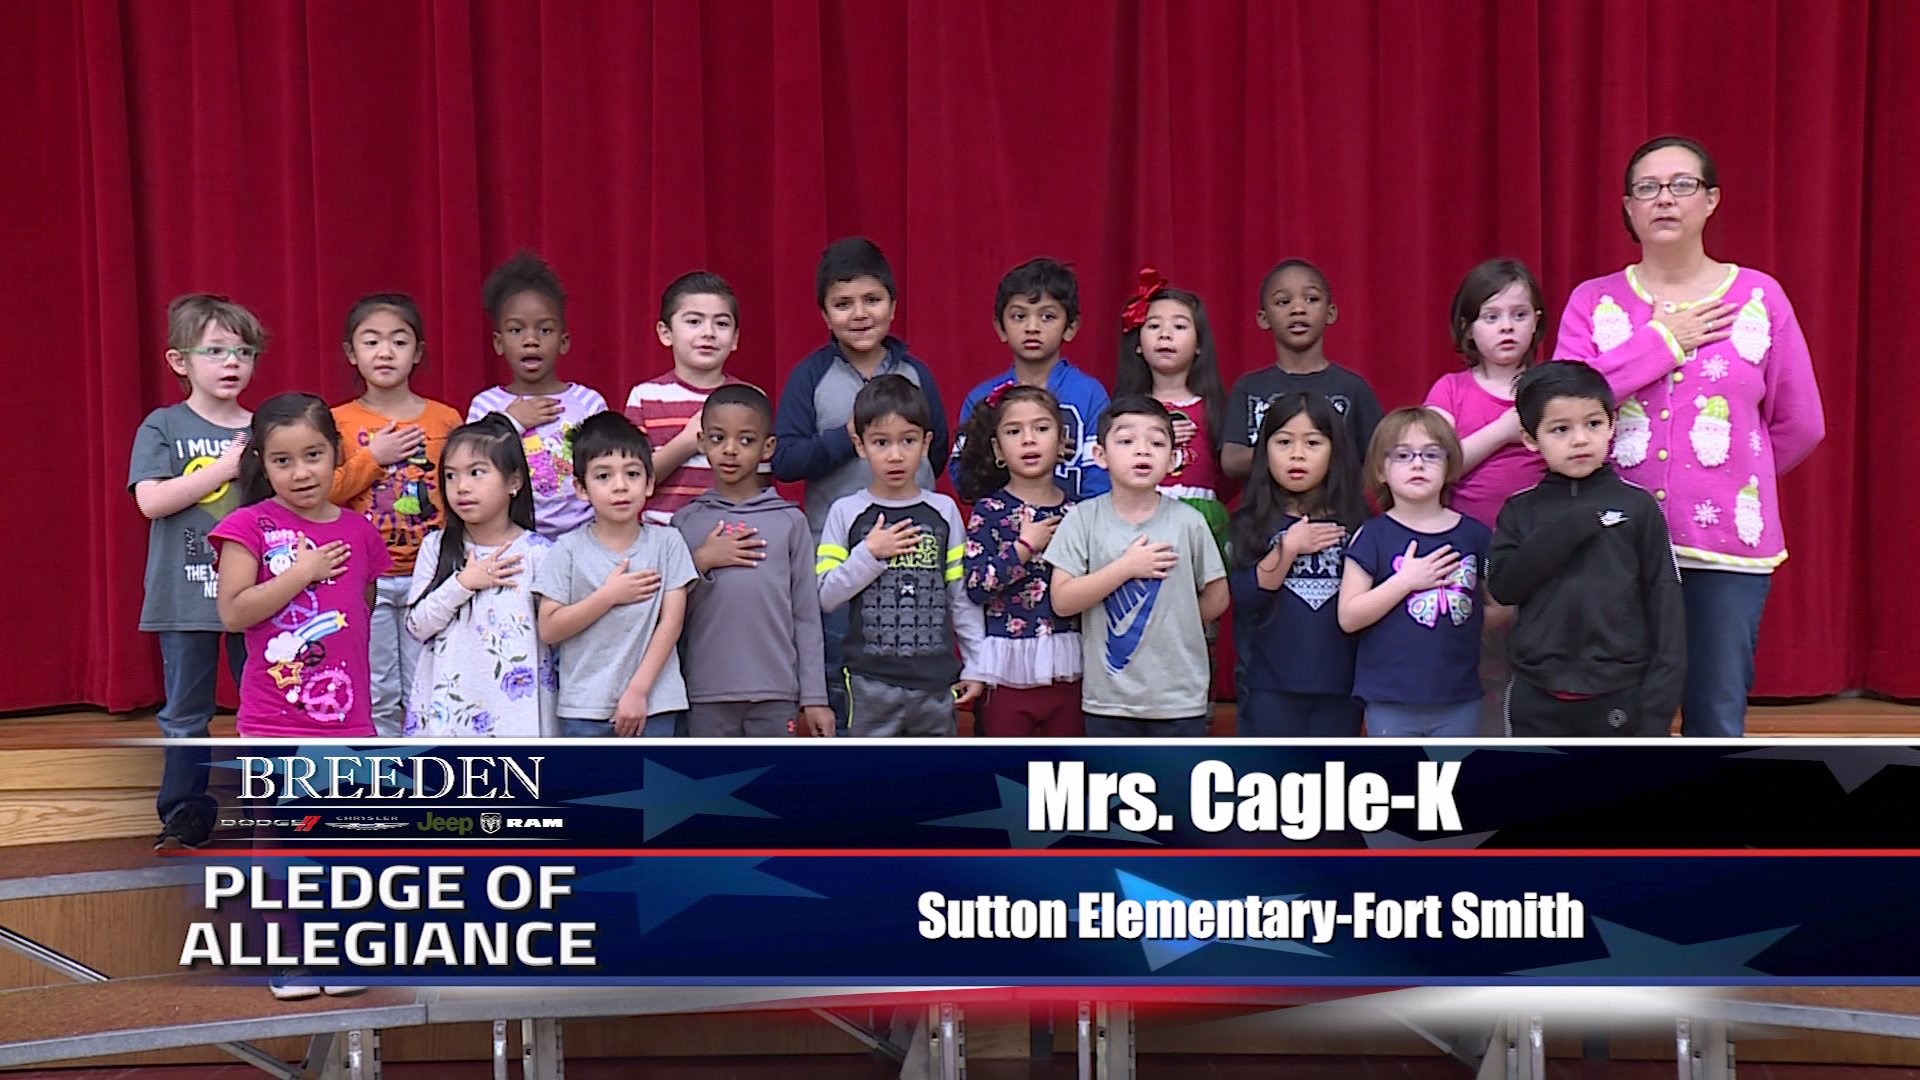 Mrs. Cagle  K Sutton Elementary, Fort Smith